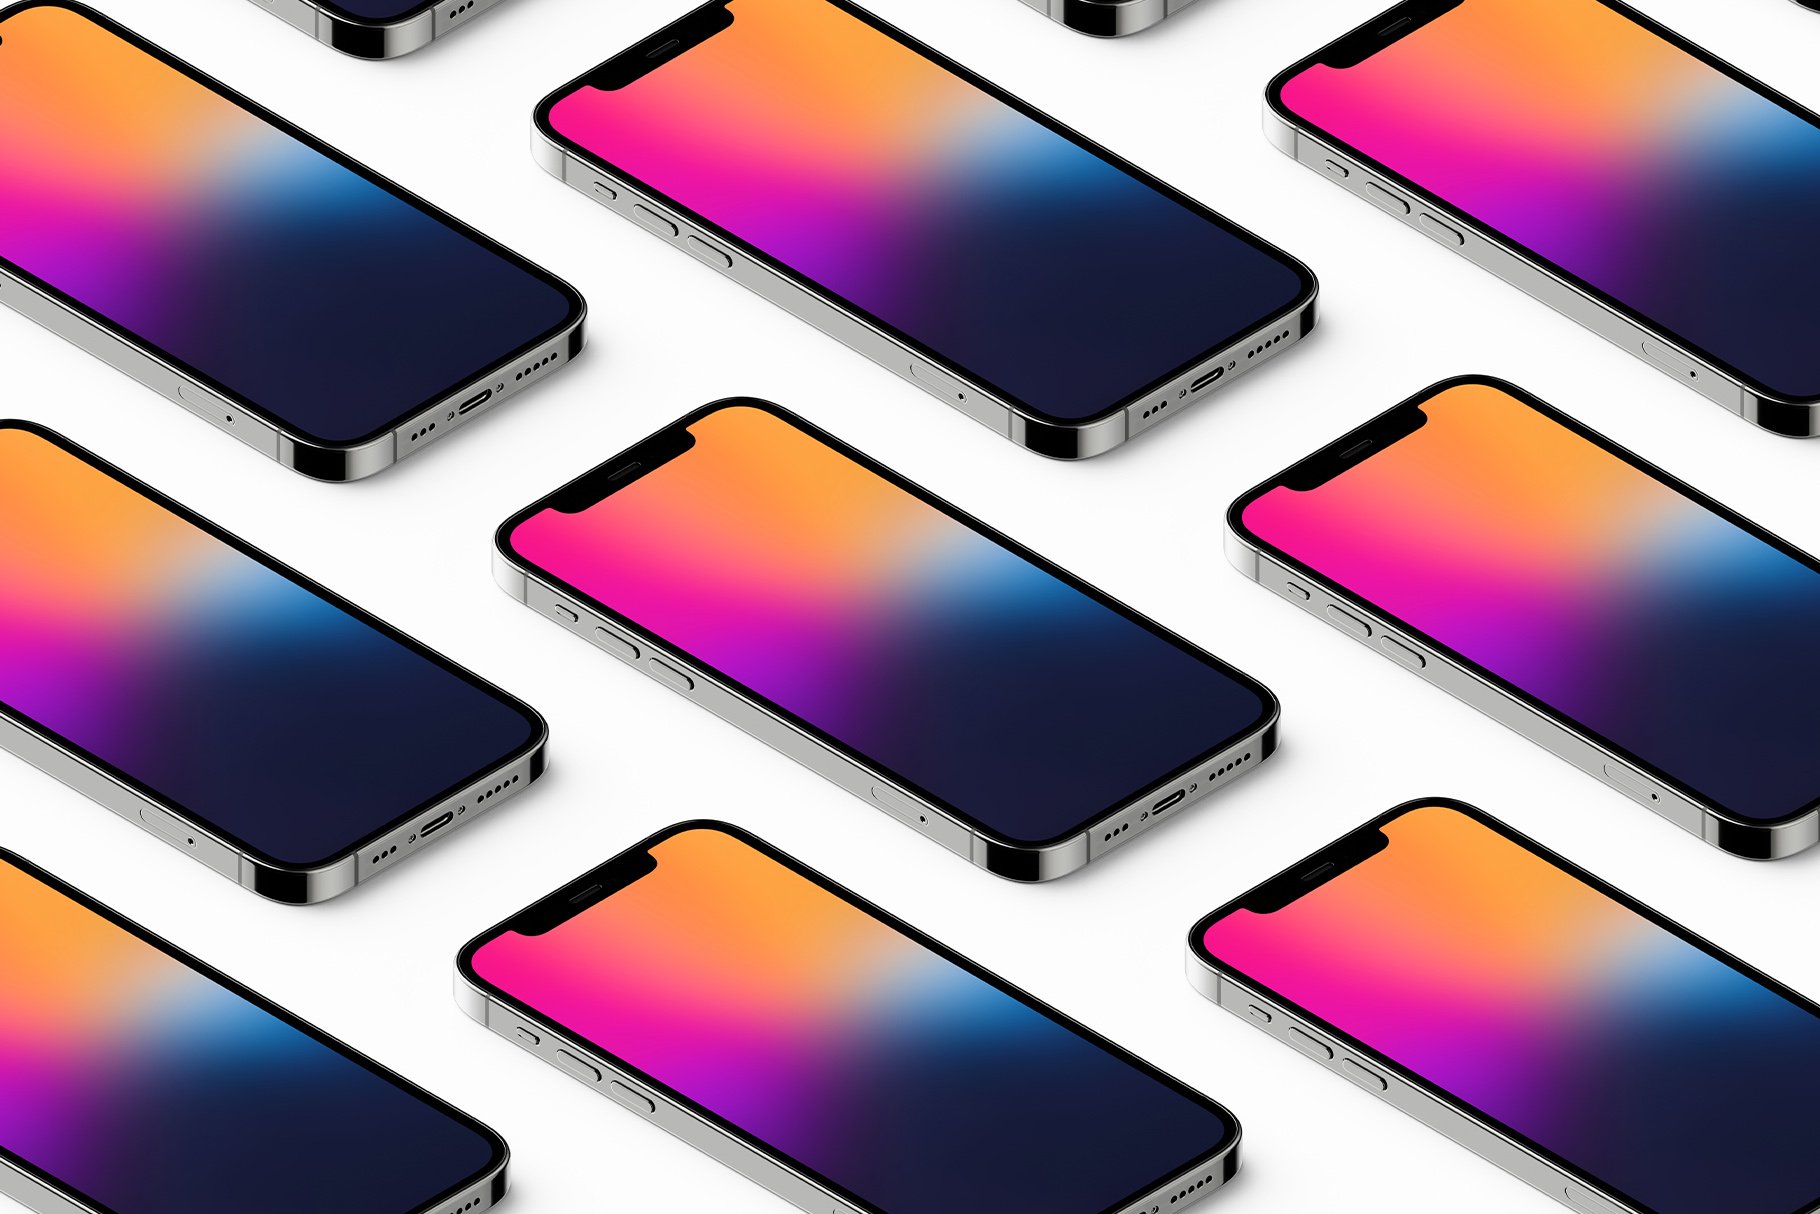 iphone 12 pro mockup pack by anthony boyd graphics 281329 684